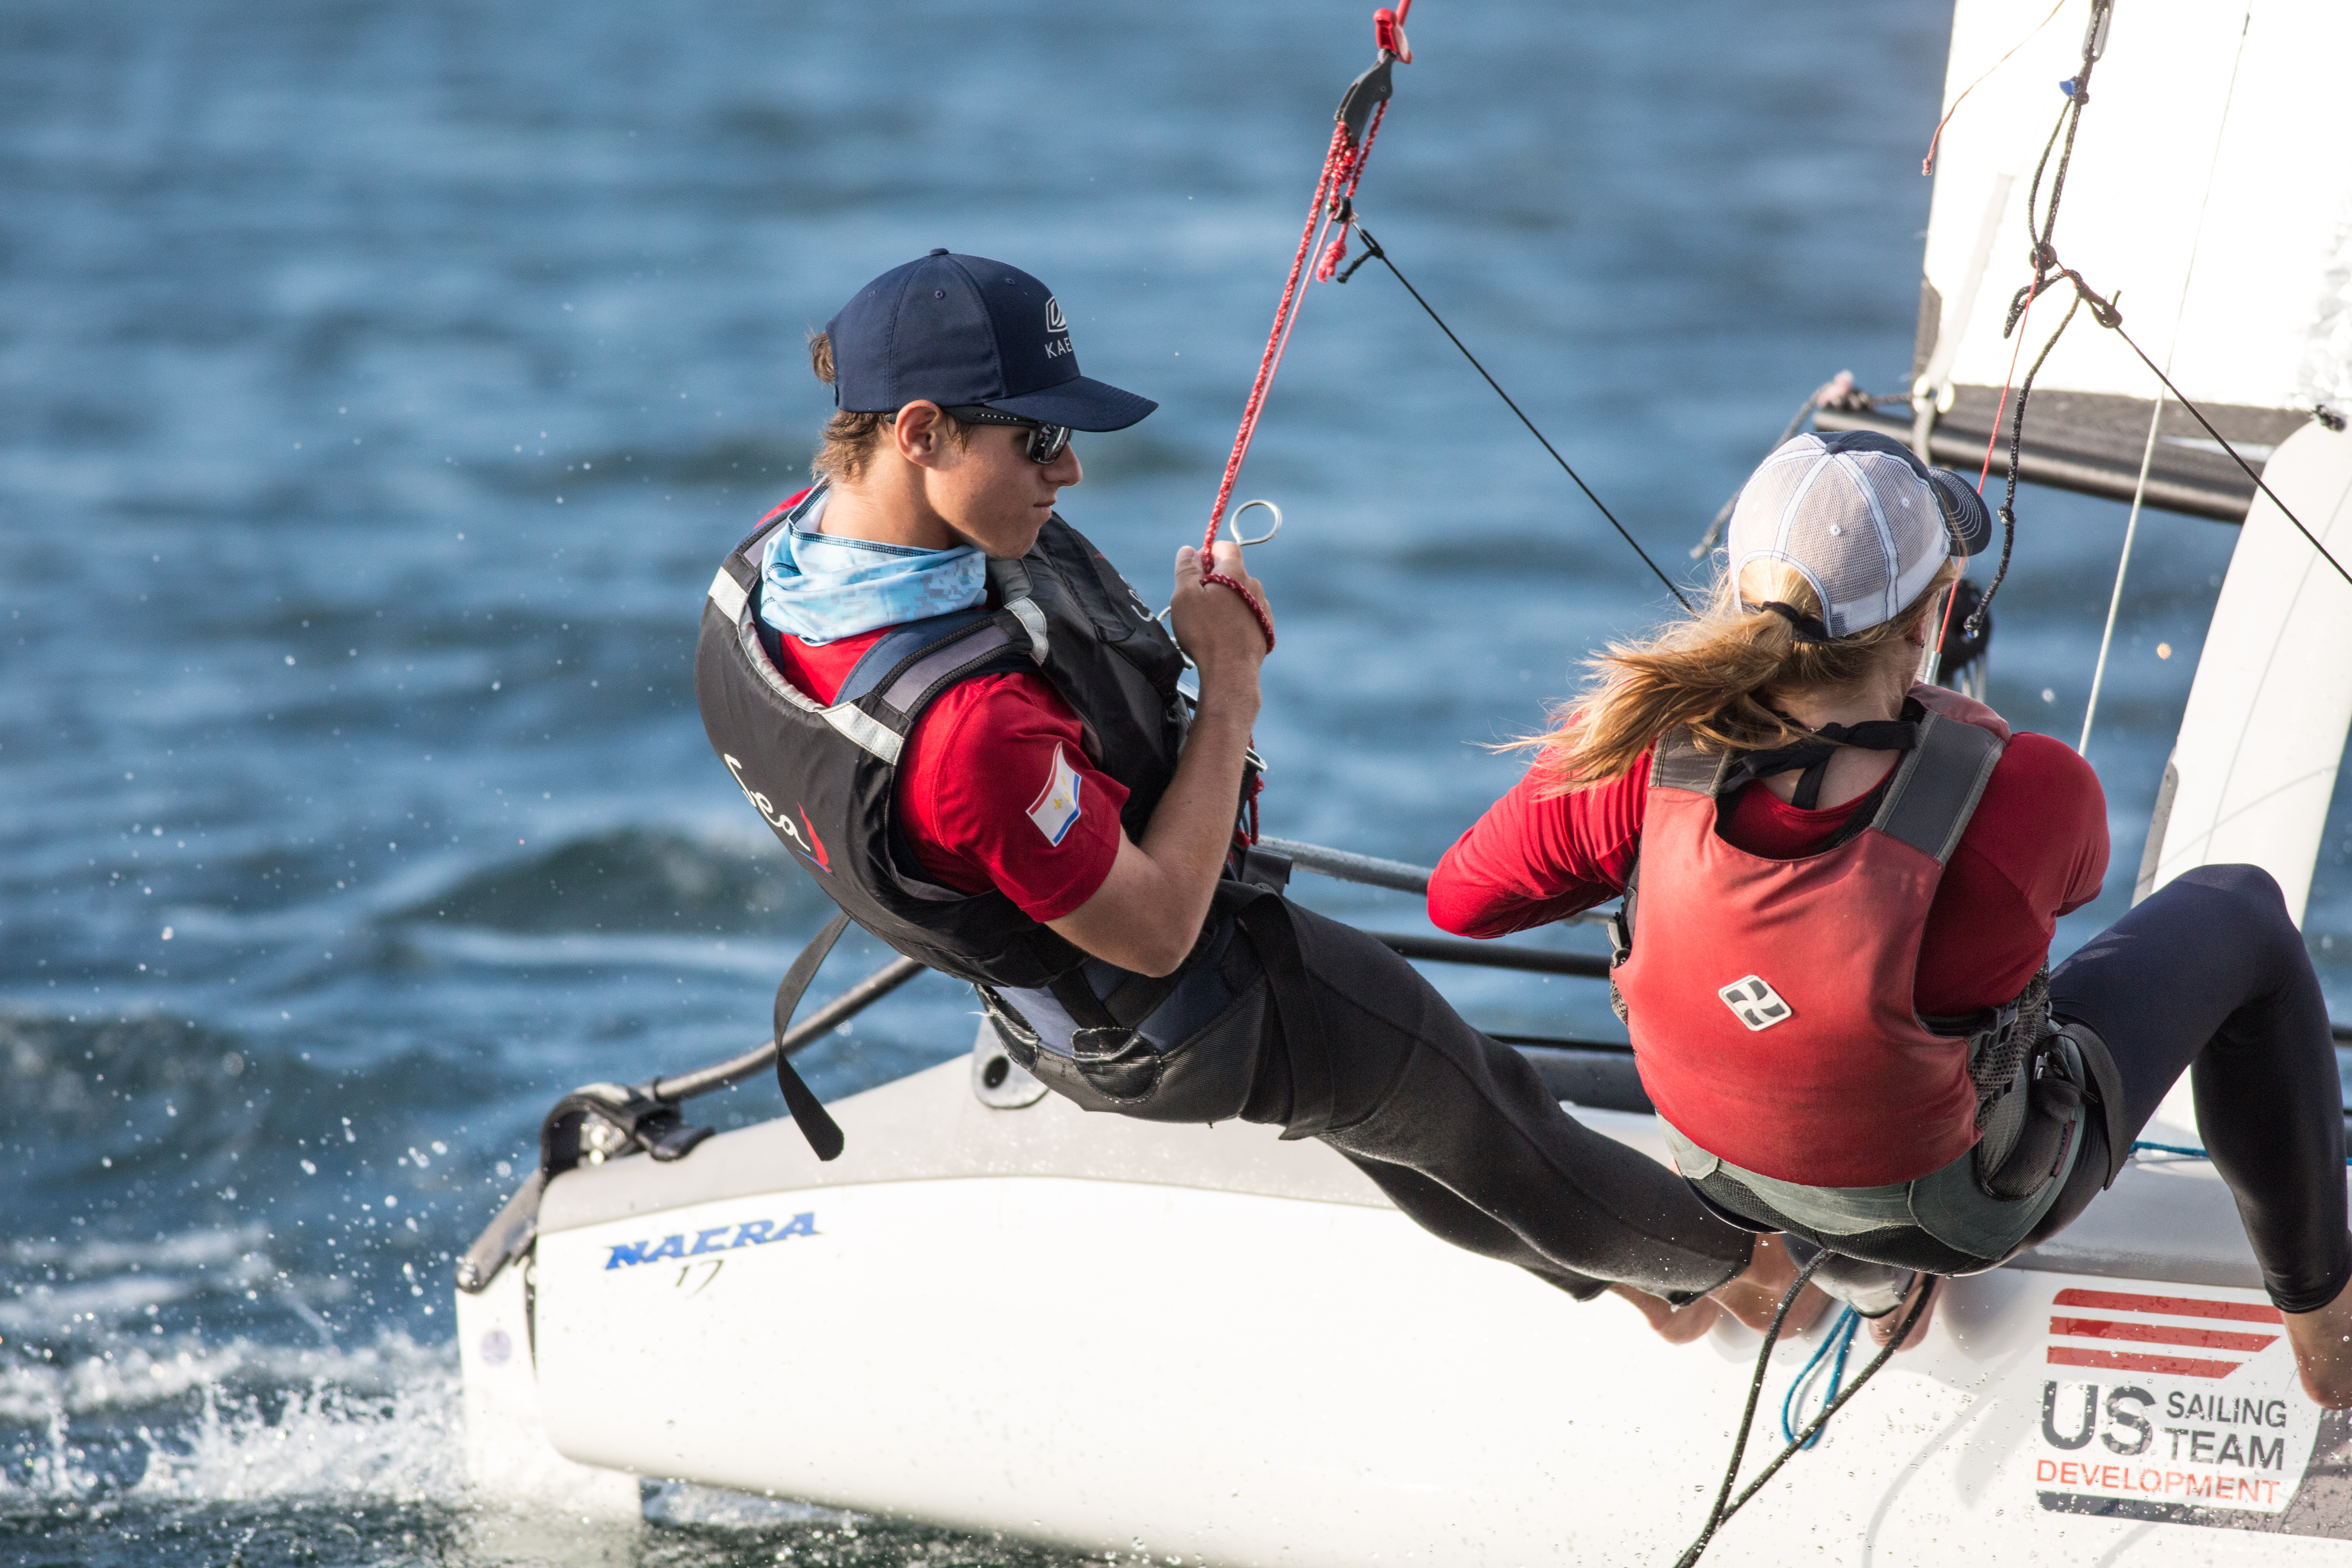 Learning About More Than Just Olympic Sailing